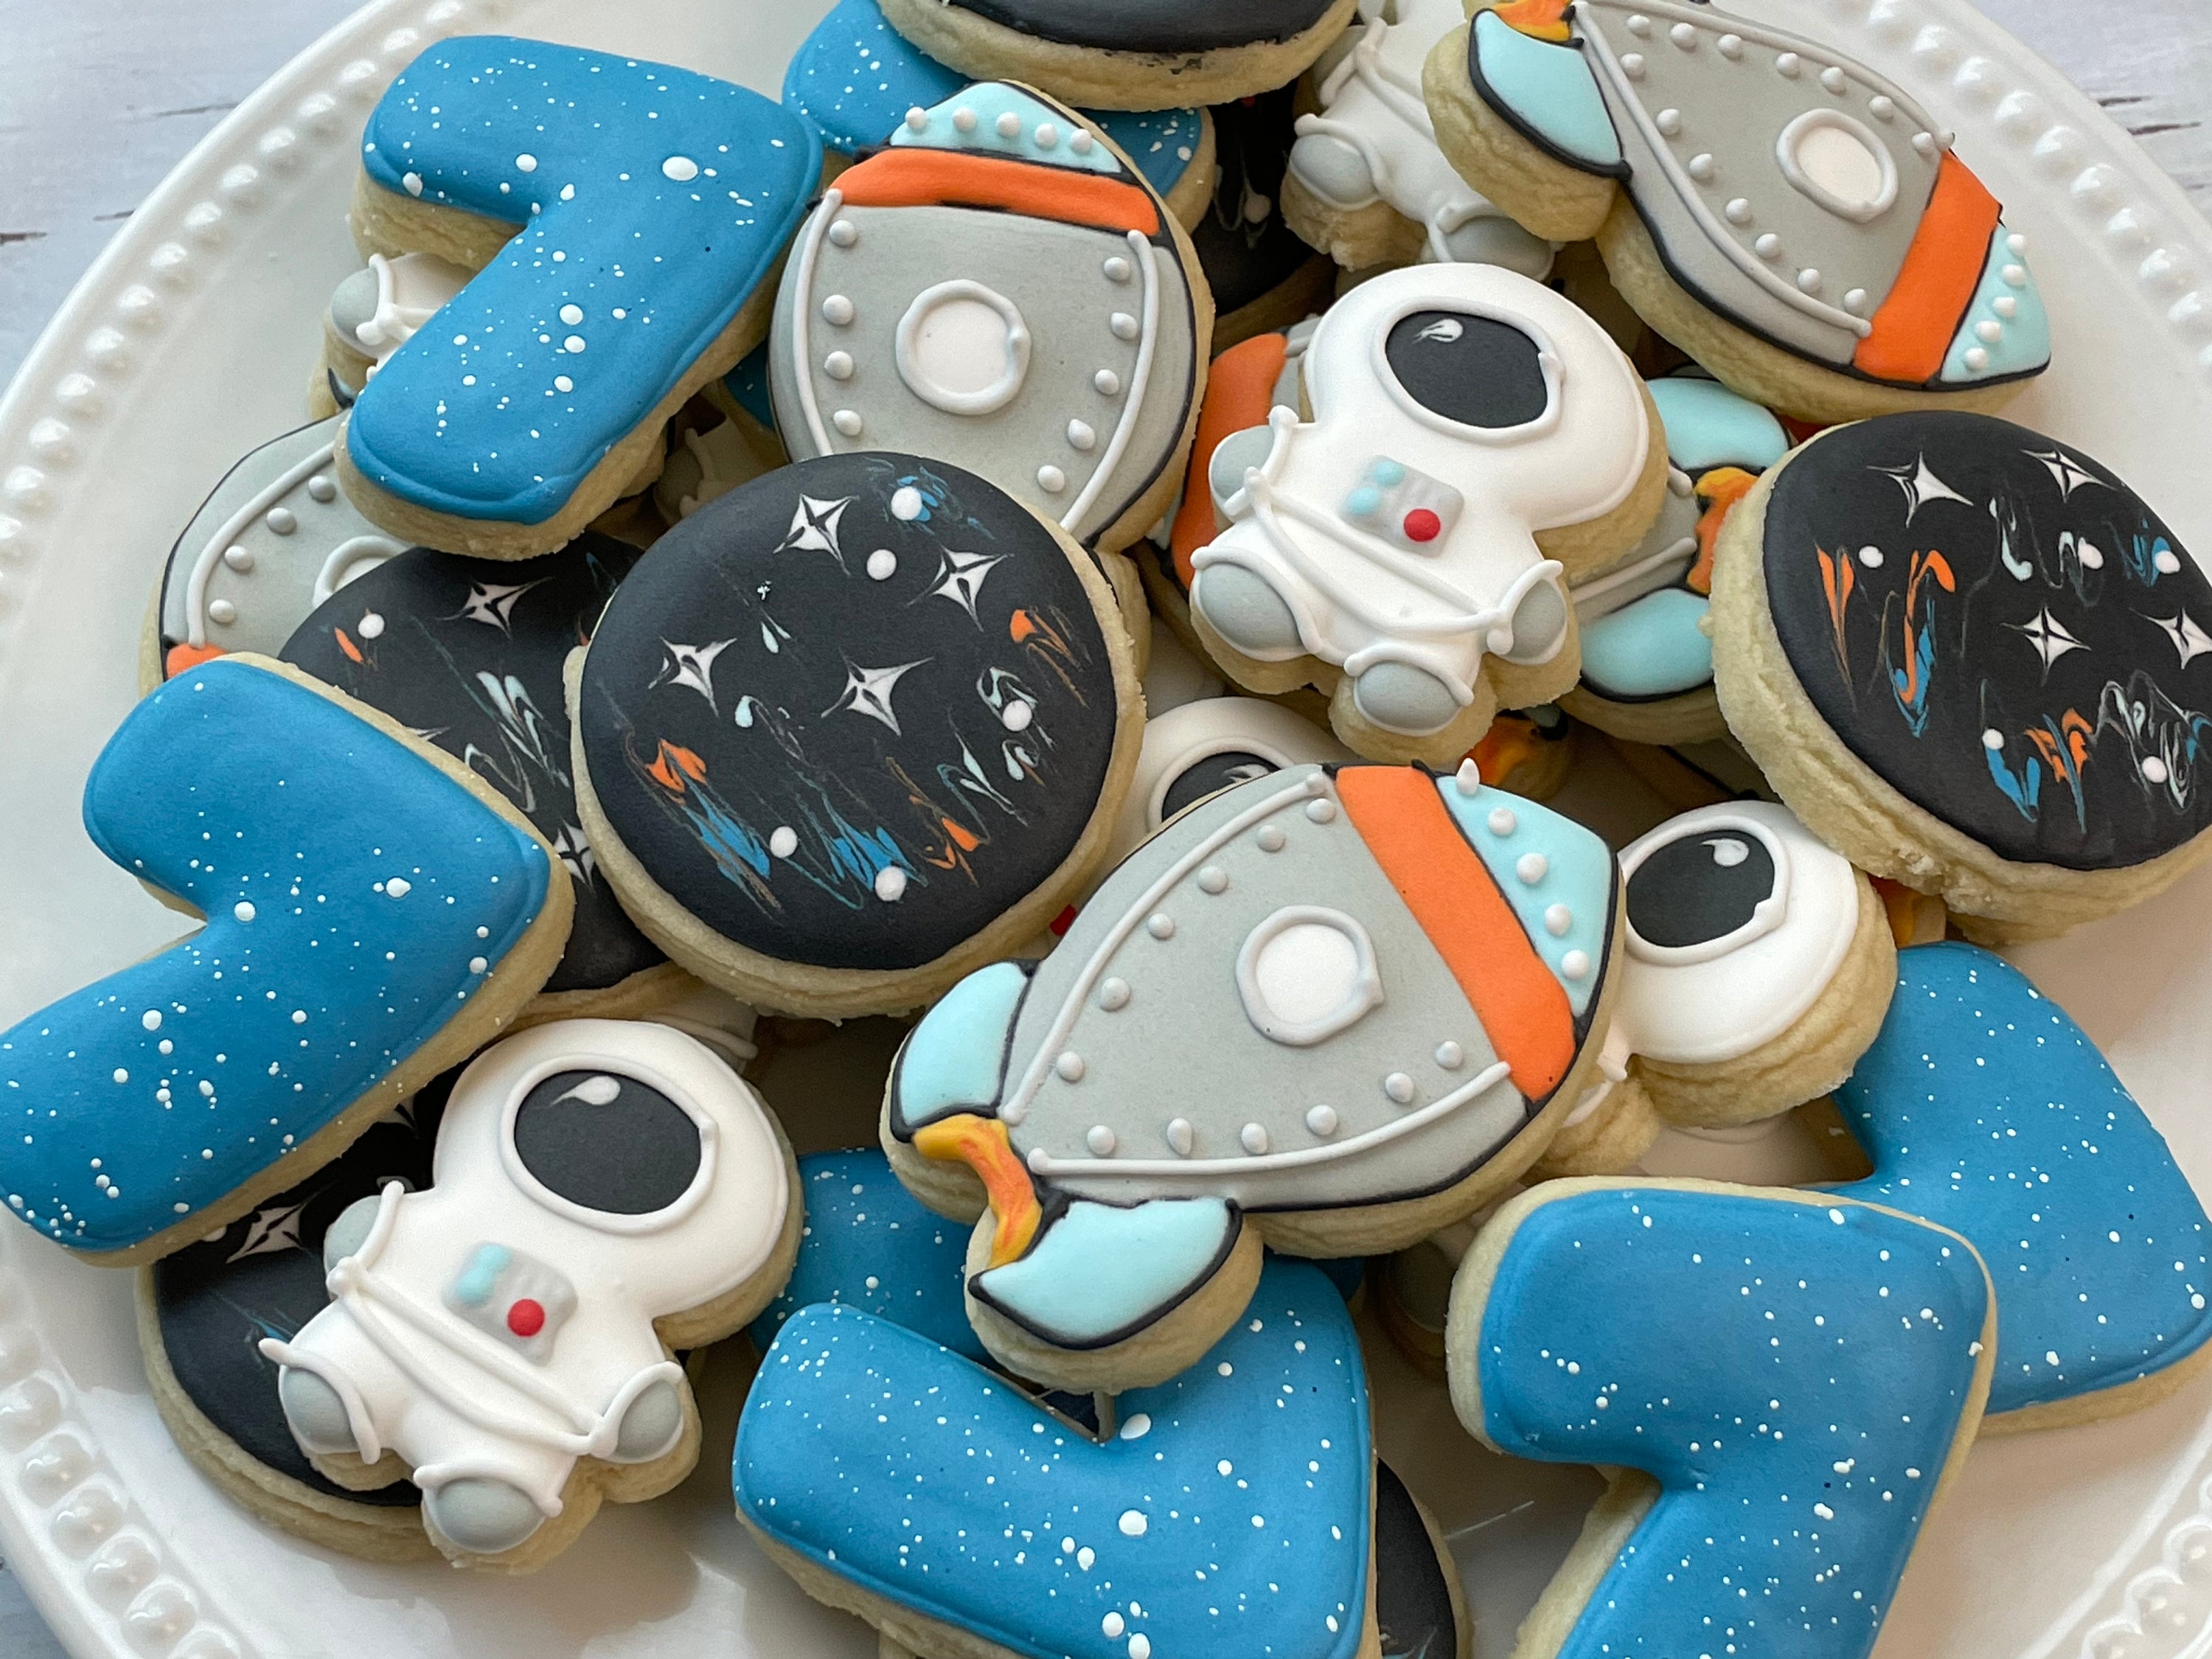 Space/Astronaut Birthday Decorated Cookies Set